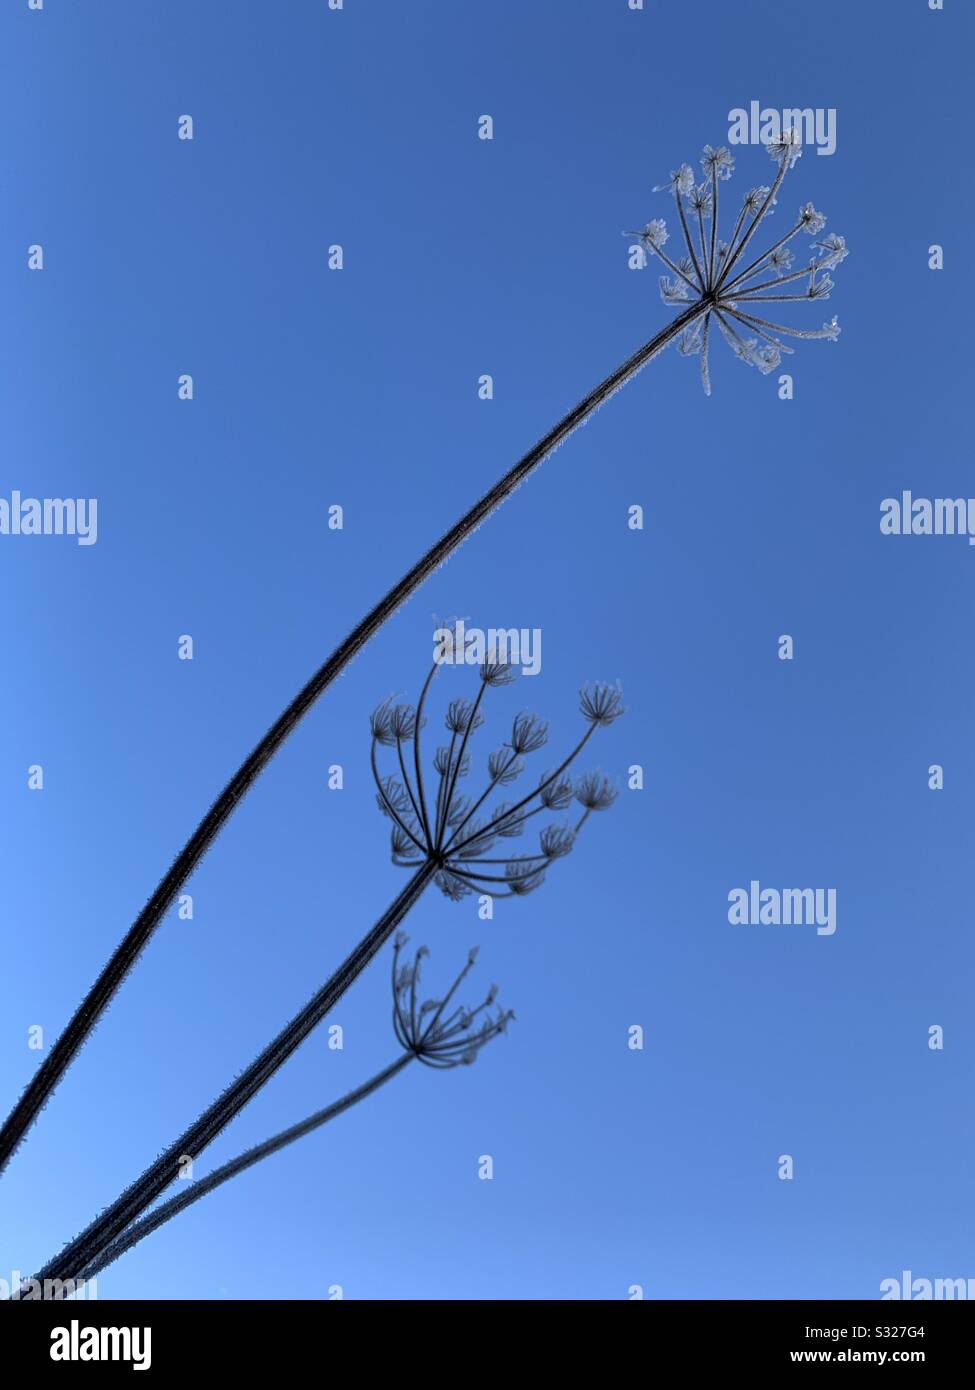 Frosty plants silhouetted against a brilliant blue sky Stock Photo